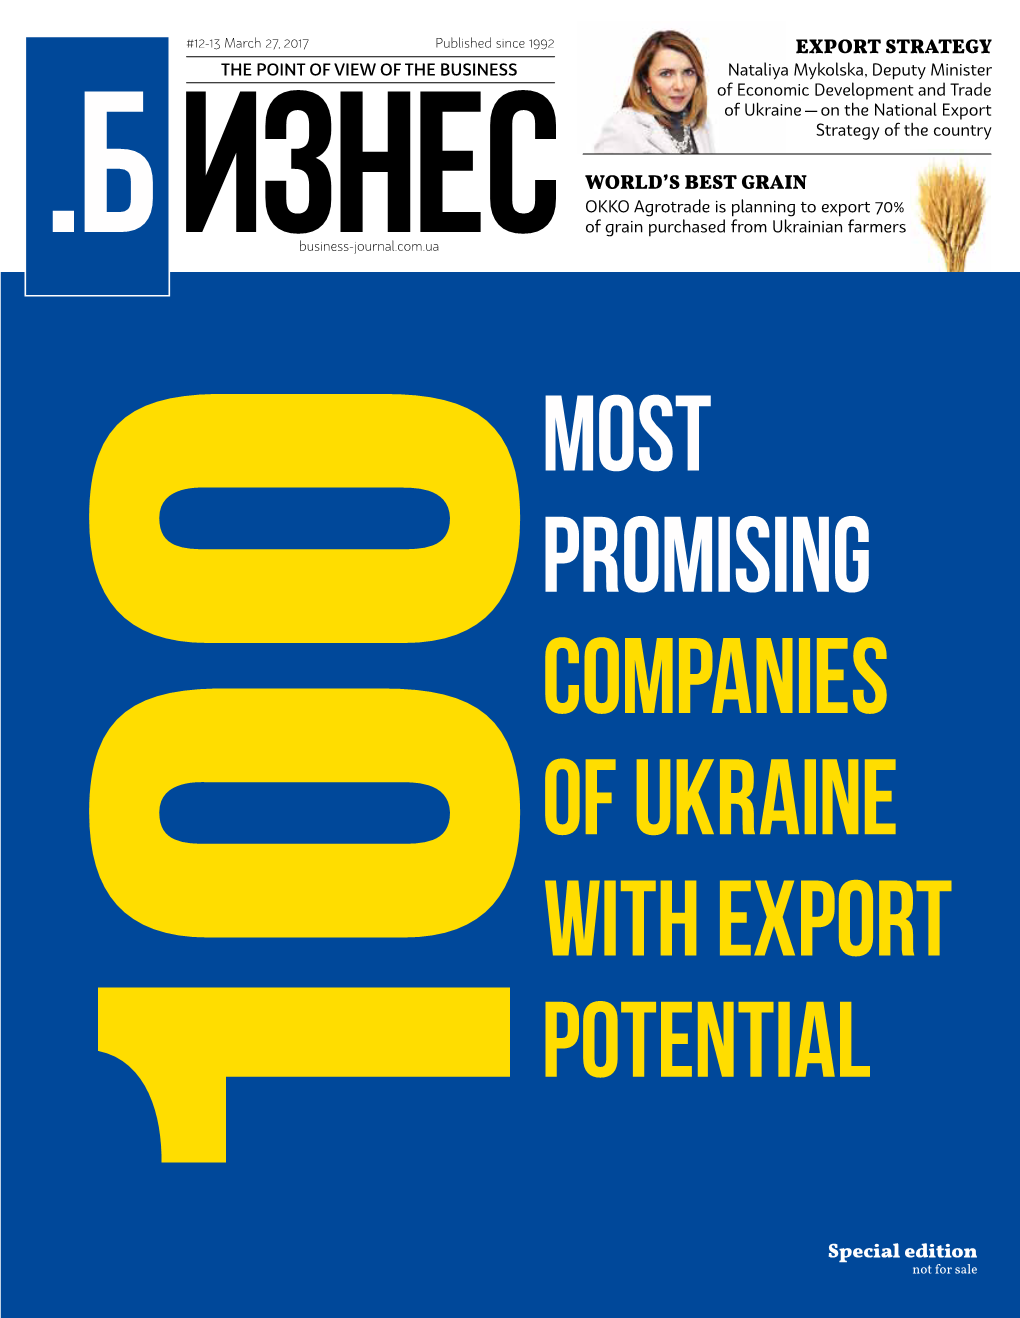 MOST PROMISING Companies of Ukraine with Export Potential